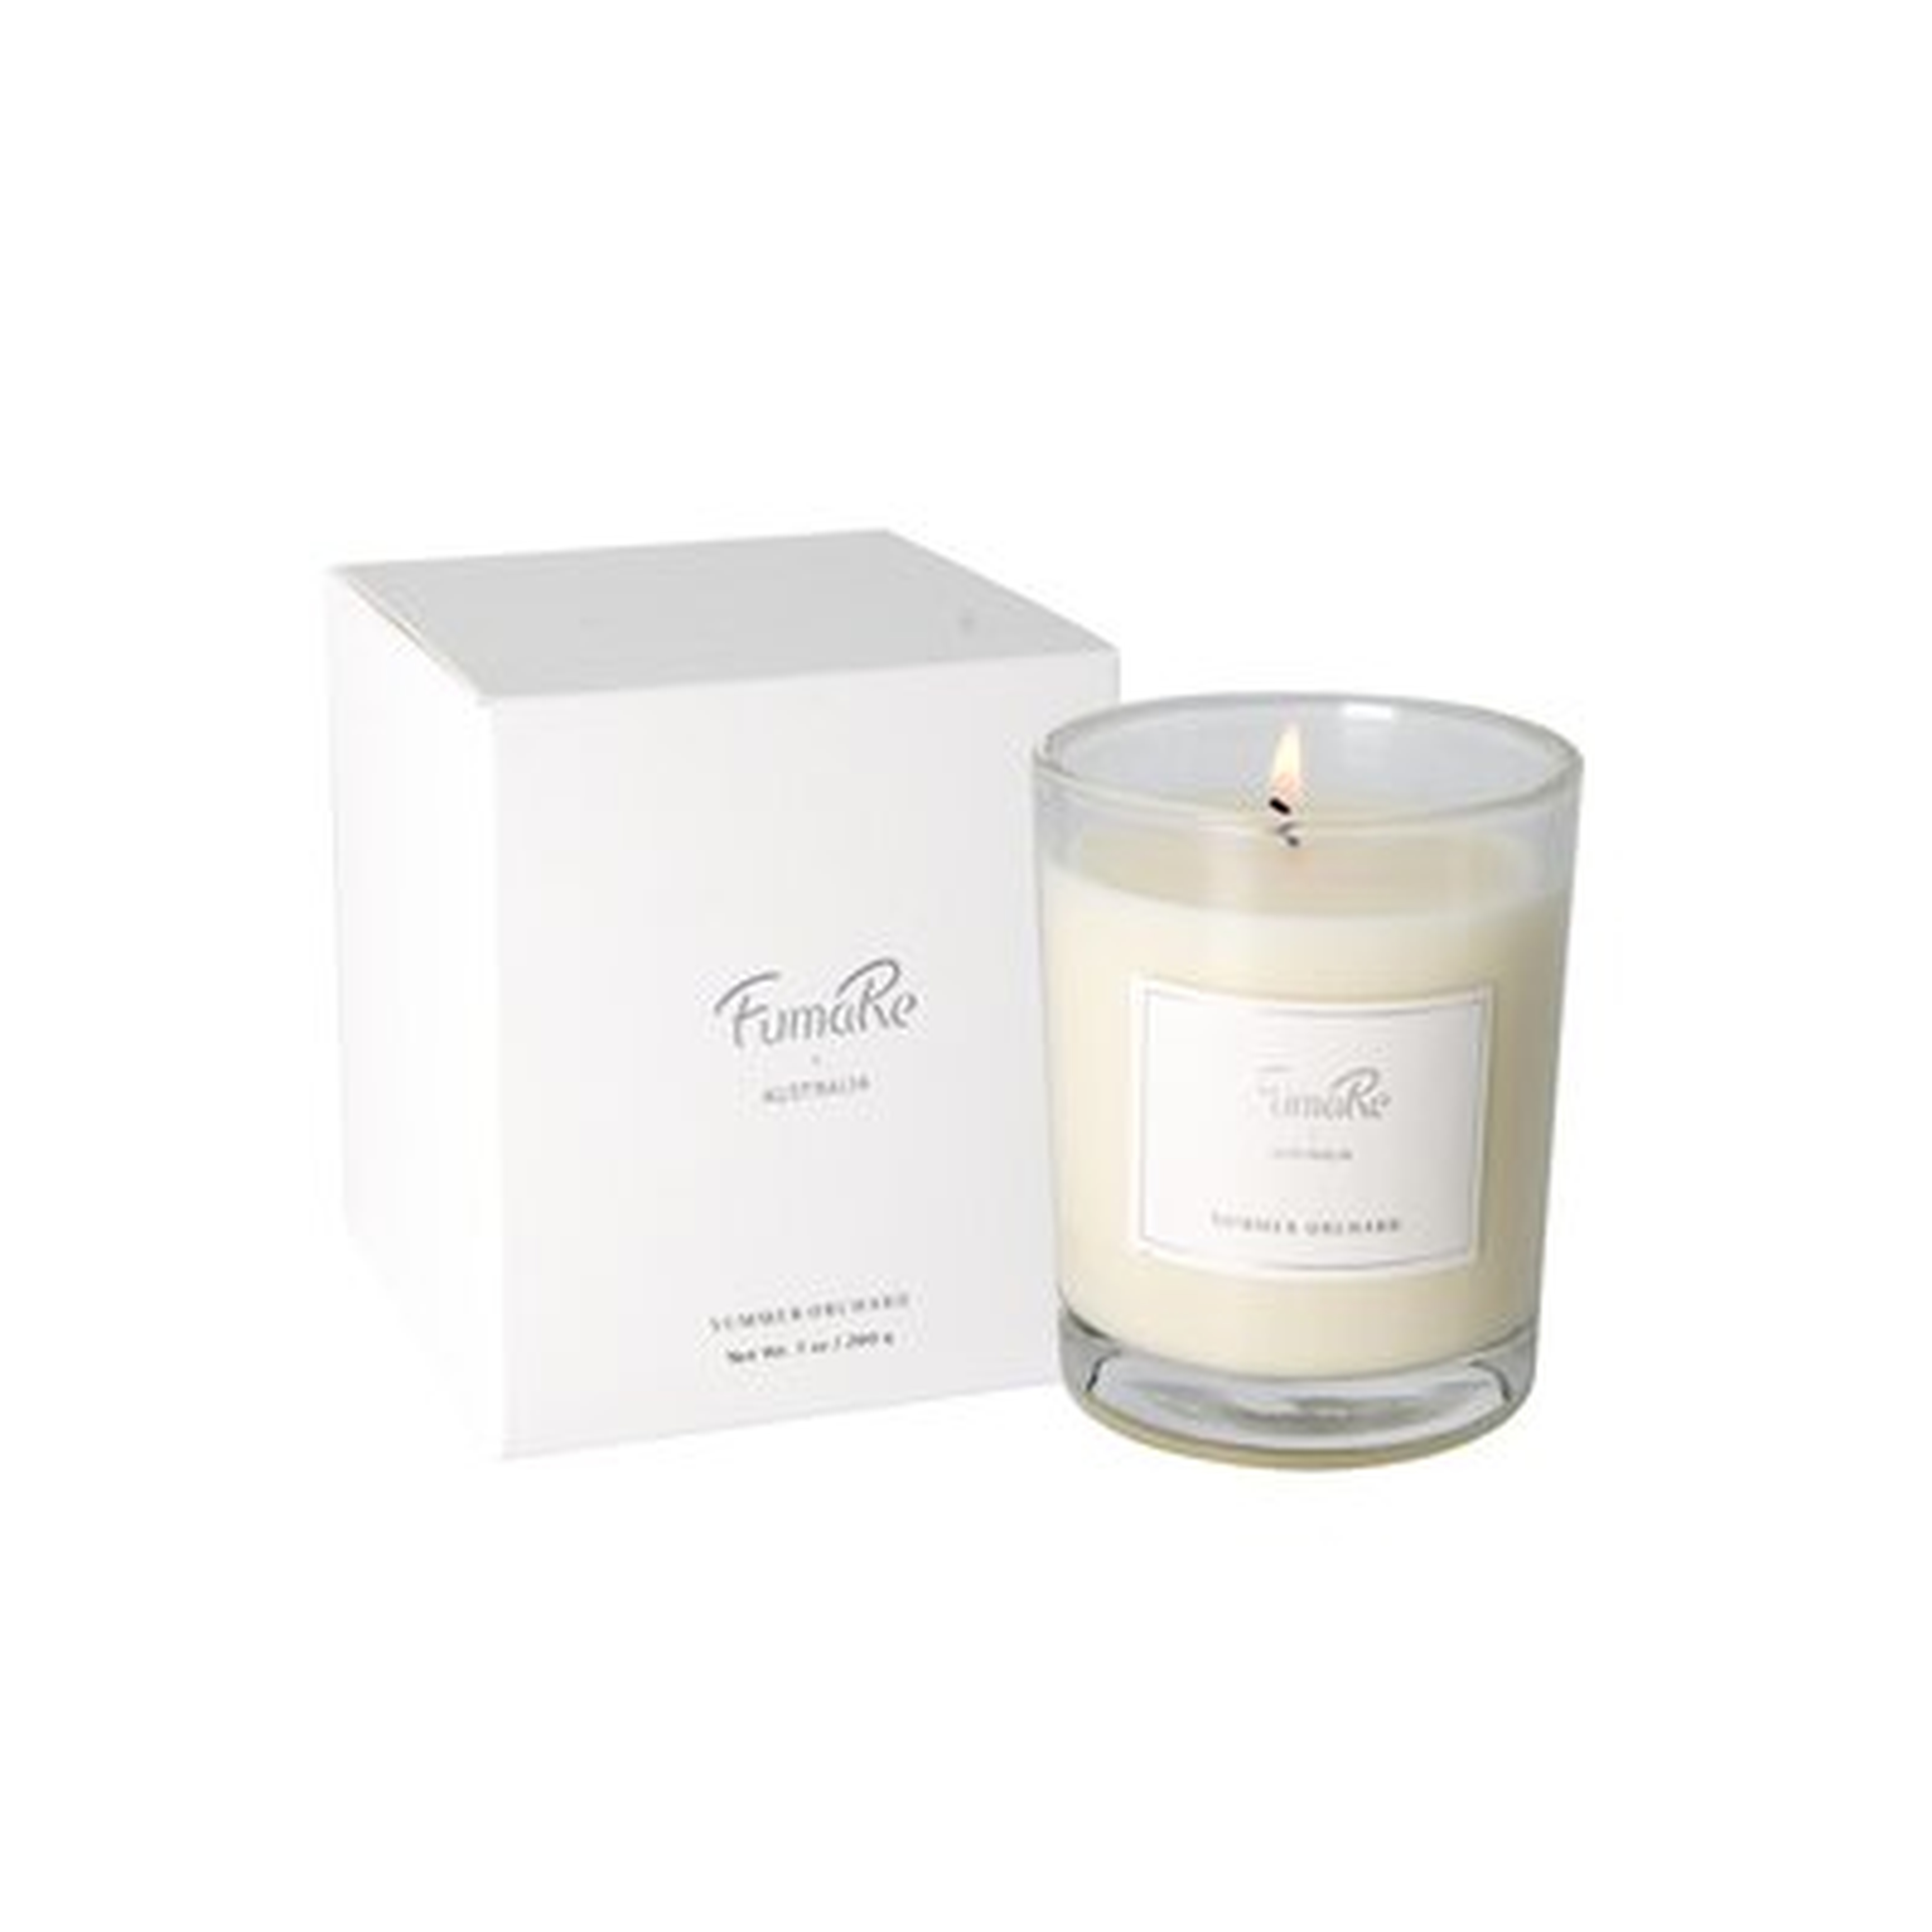 Flowers Scented Votive Candle - Wayfair